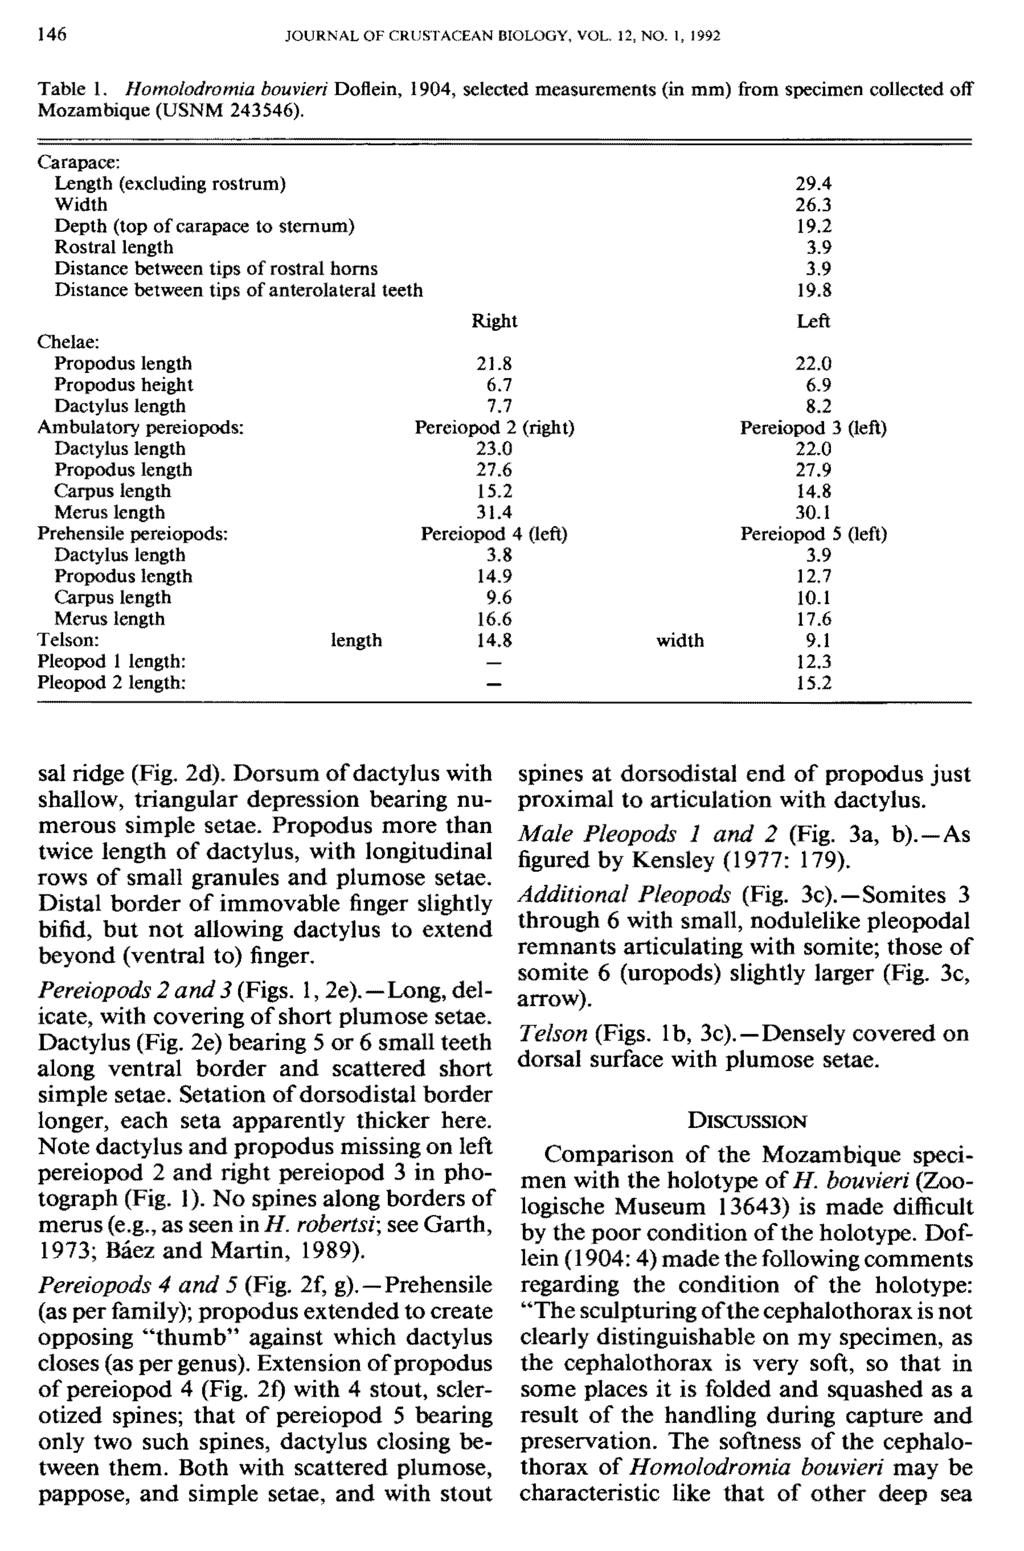 146 JOURNAL OF CRUSTACEAN BIOLOGY, VOL. 12, NO. 1, 1992 Table 1. Homolodromia bouvieri Doflein, 1904, selected measurements (in mm) from specimen collected off Mozambique (USNM 243546).